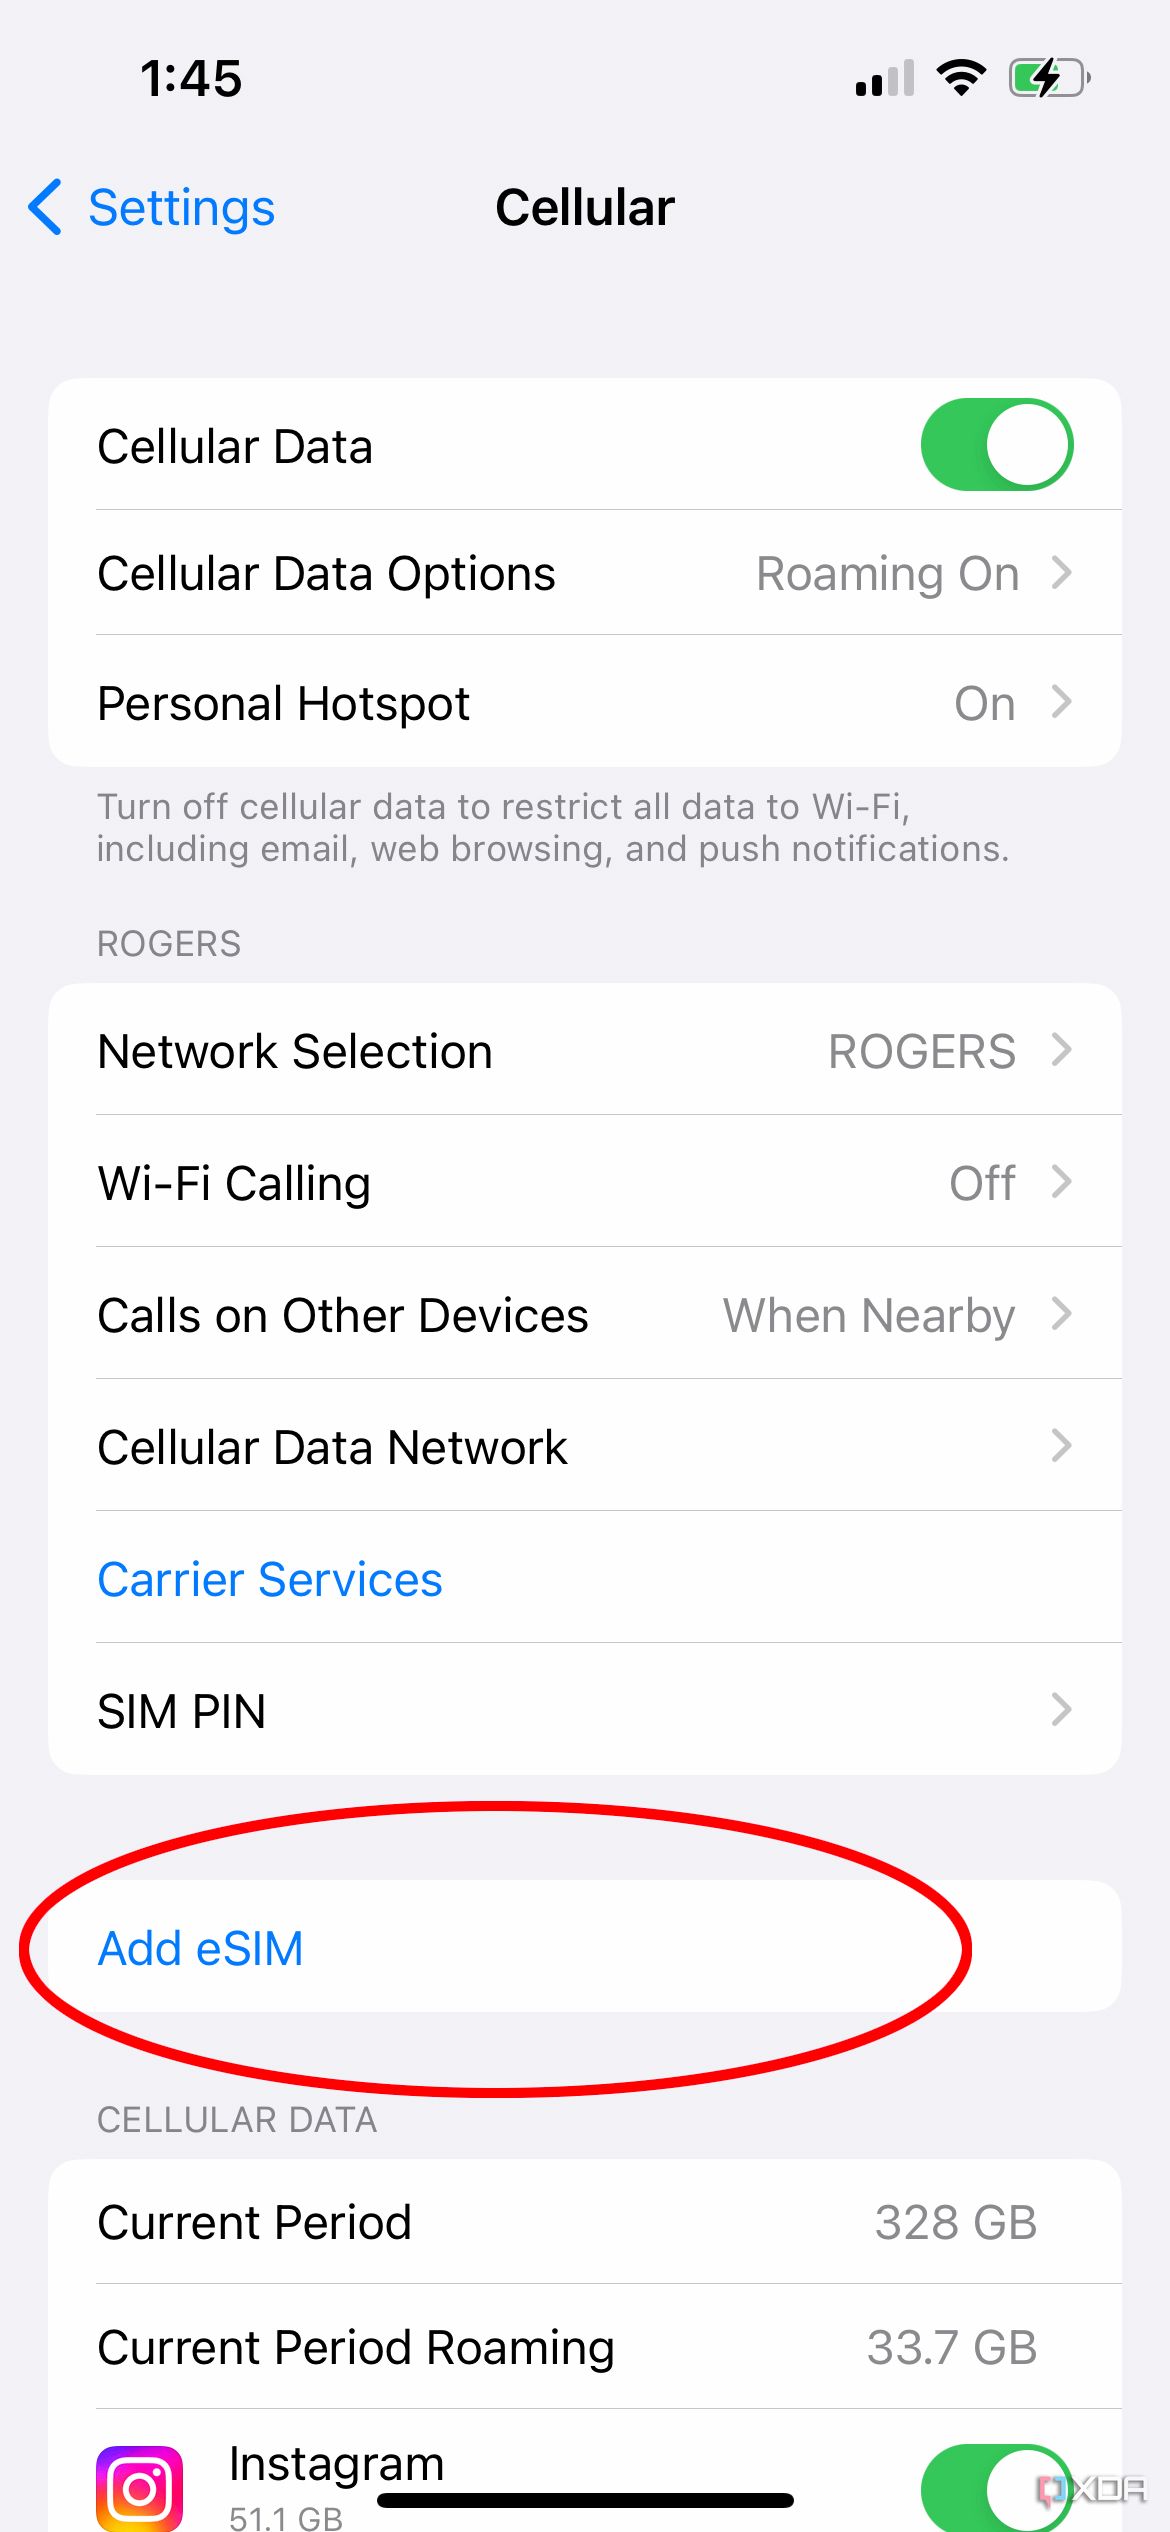 iPhone Cellular settings menu with Add eSIM highlighted